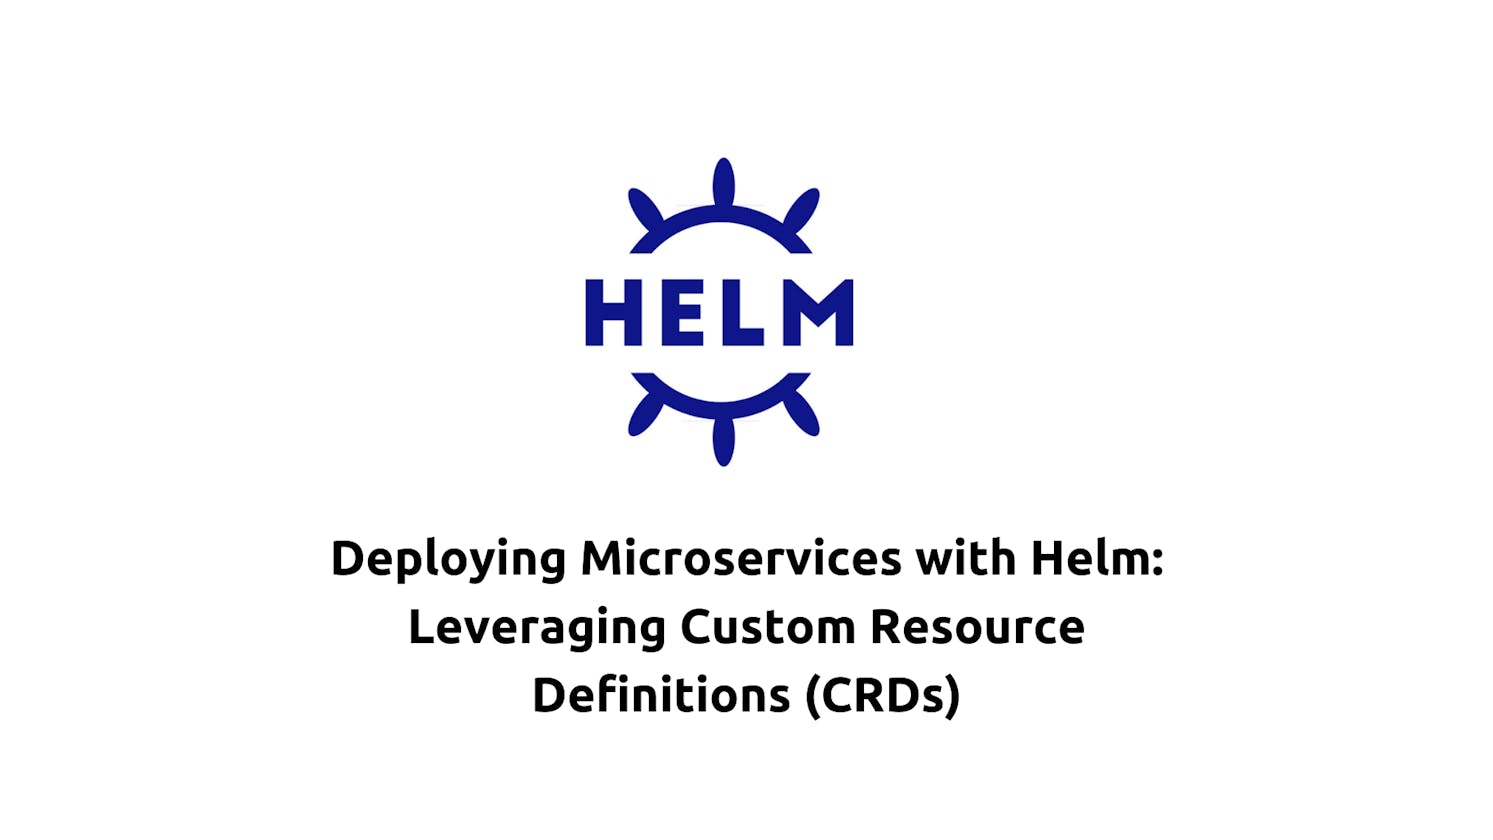 Deploying Microservices with Helm: Leveraging Custom Resource Definitions (CRDs)